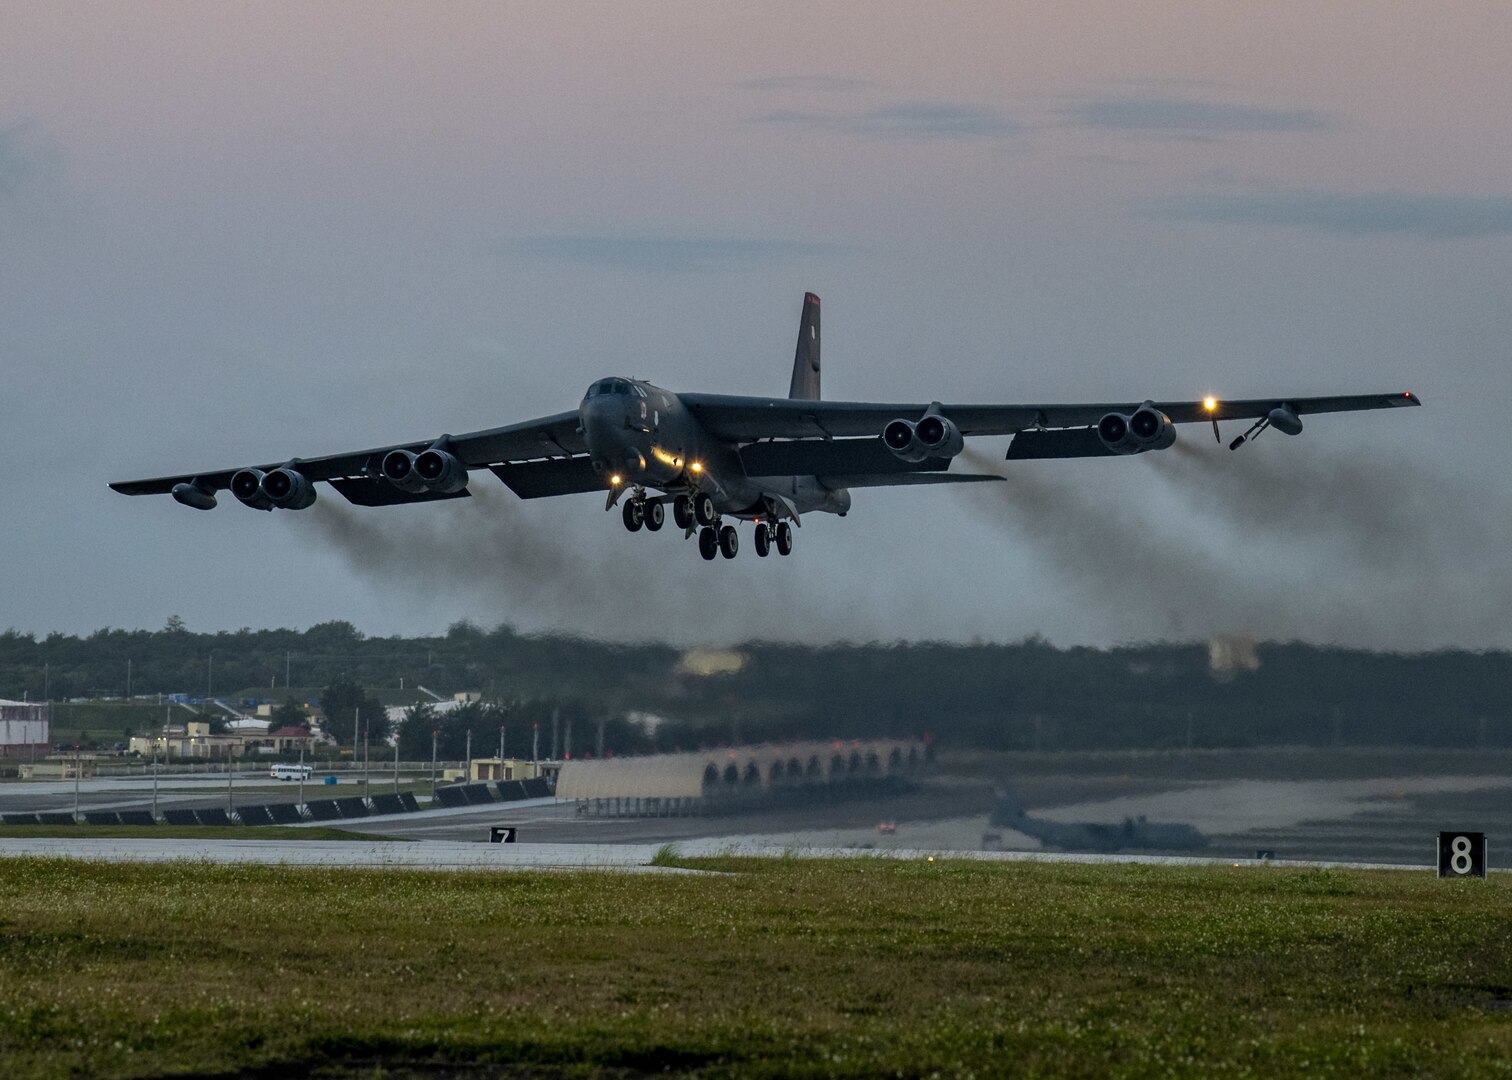 A U.S. Air Force B-52H Stratofortress from the 96th Expeditionary Squadron takes off upon completion of a Bomber Task Force deployment at Andersen Air Force Base, Guam, Mar. 9, 2022. Bomber Task Force missions demonstrate lethality and interoperability in support of a free and open Indo-Pacific. (U.S. Air Force photo by Staff Sgt. Lawrence Sena)